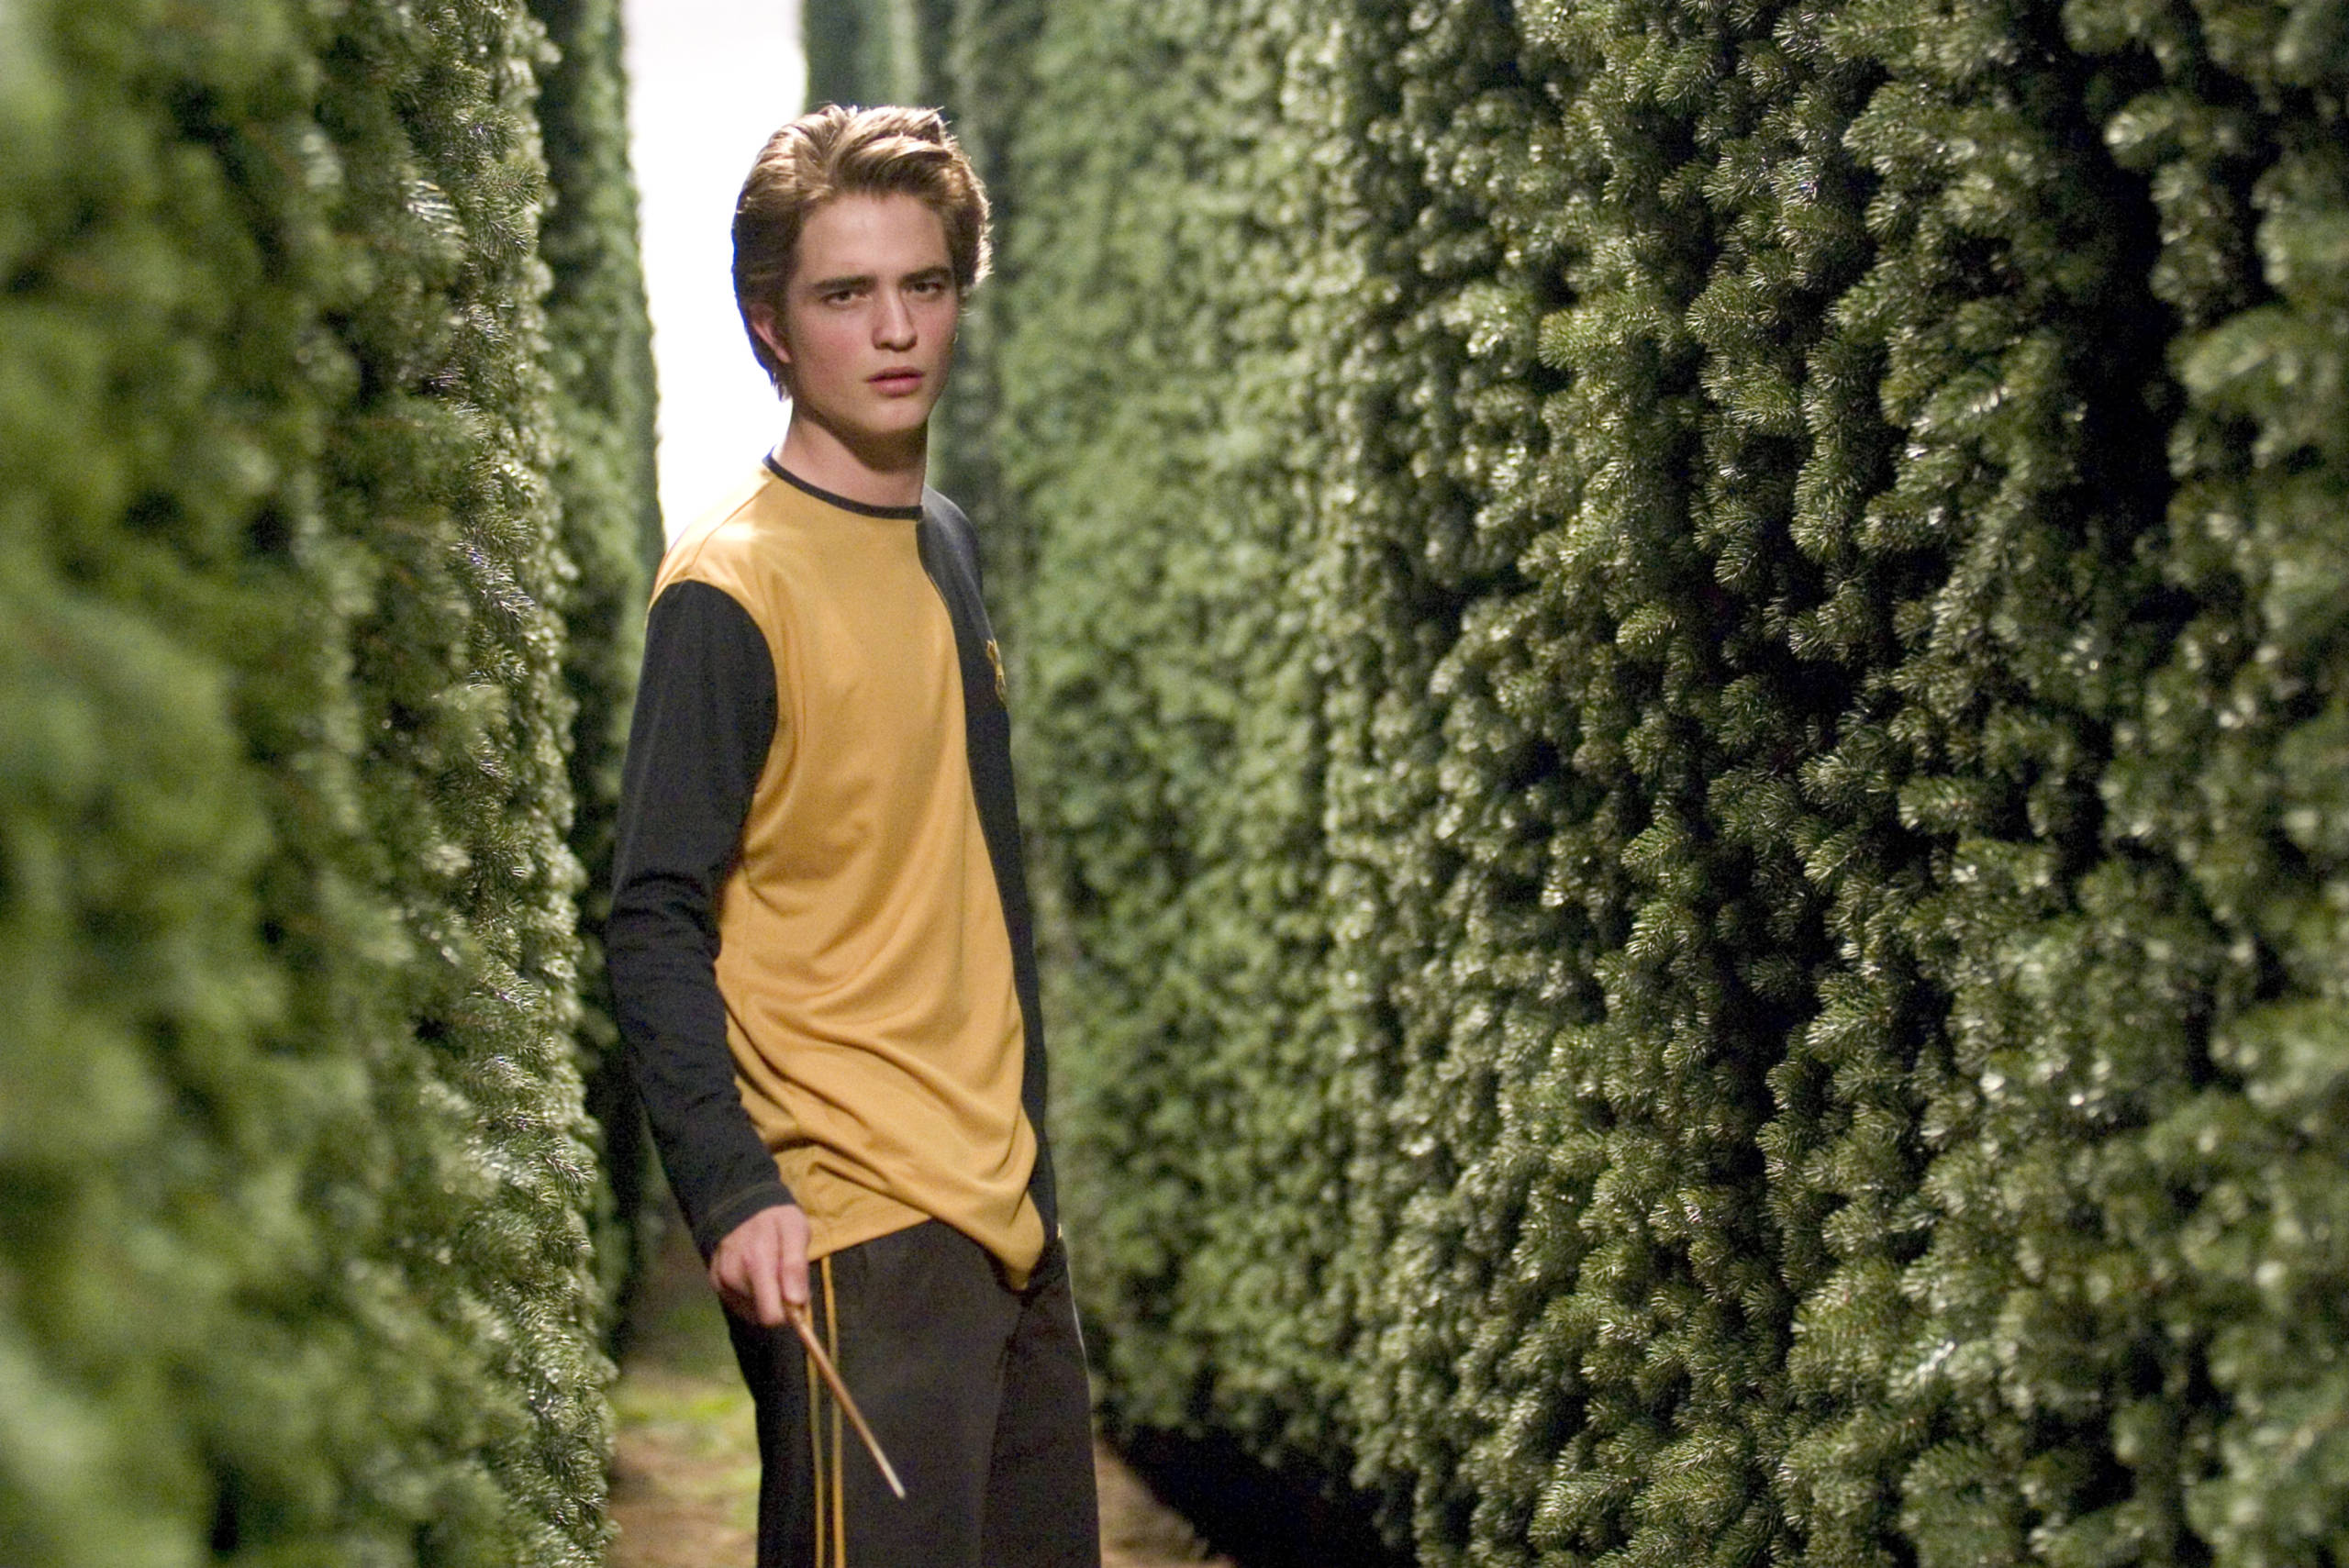 Cedric stands in the maze prepared to take on the horrors that lie within.